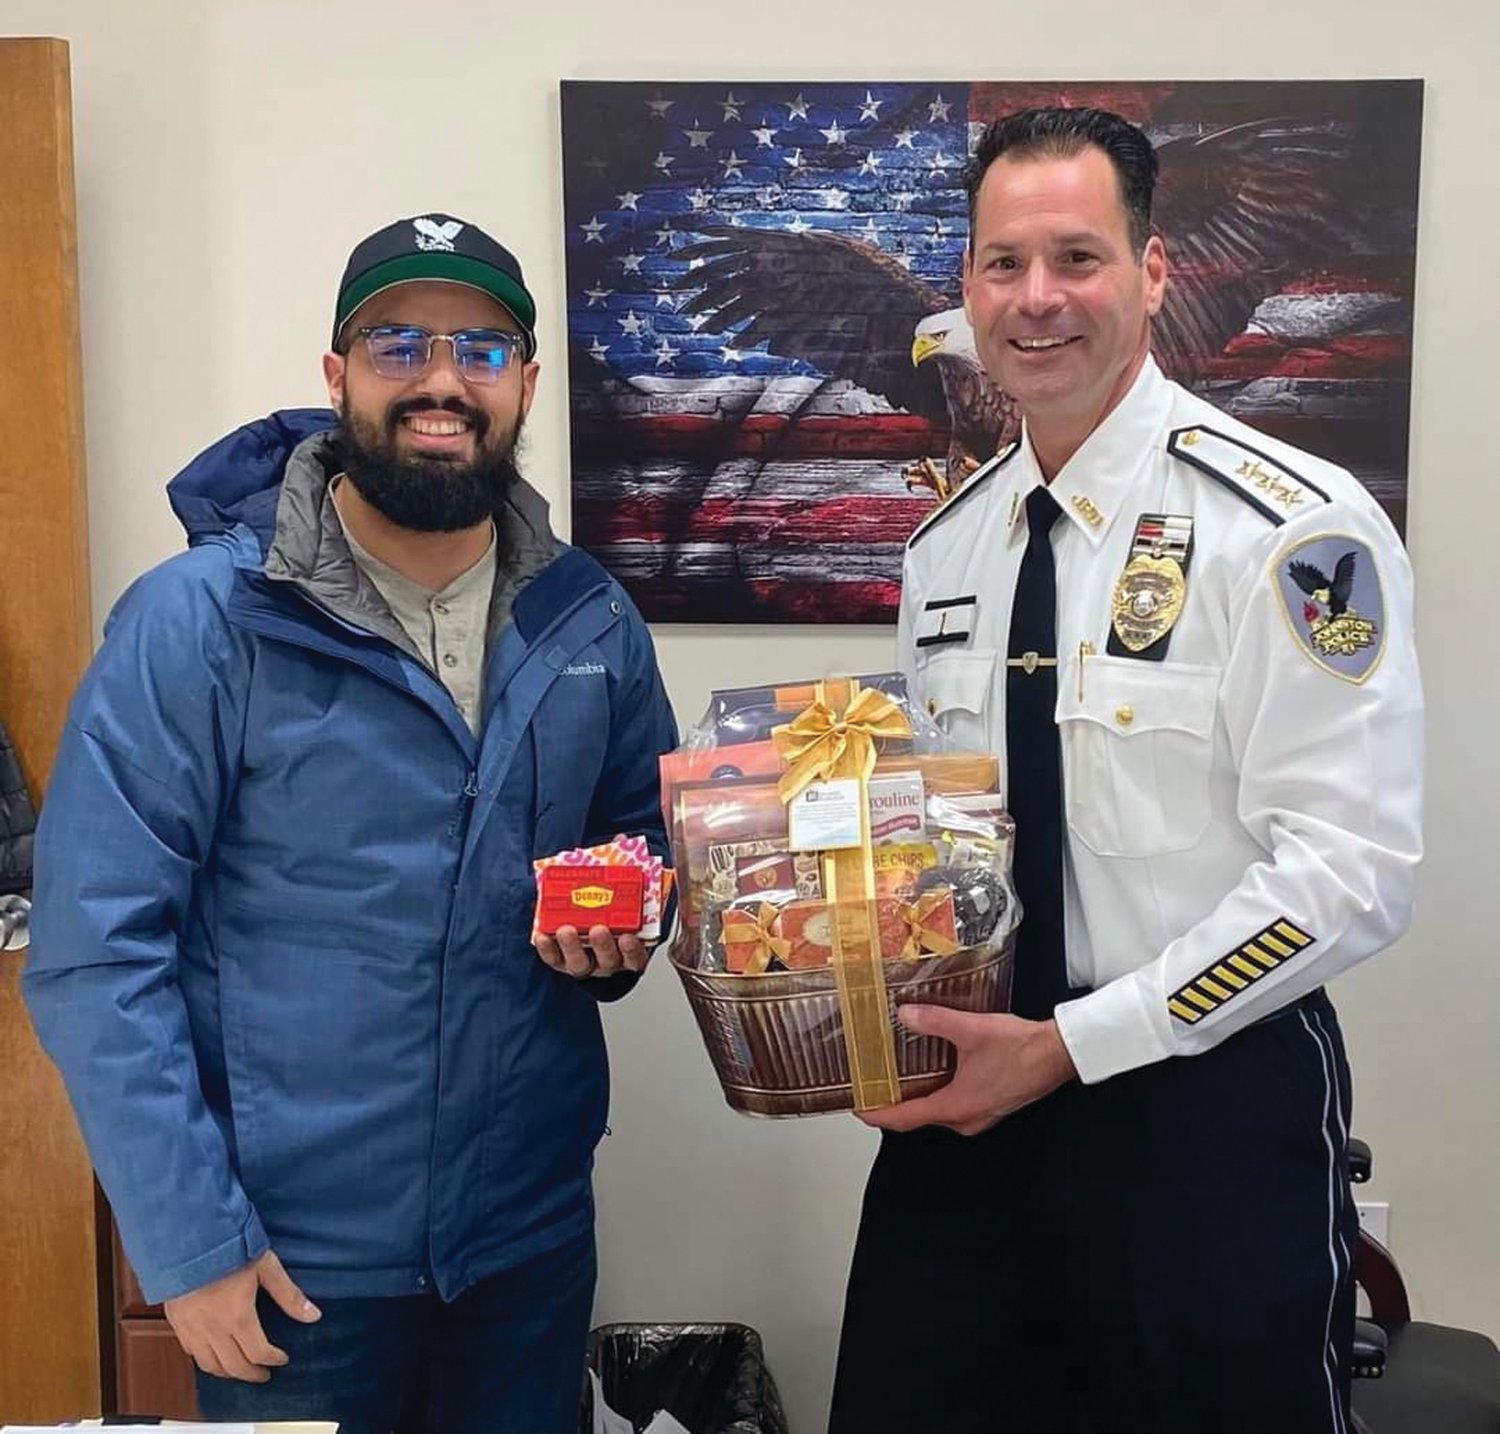 GIFT OF THANKS: The Johnston Police Department extends its “sincere thanks to Pastor Elton Perdomo and the entire congregation of the Greater RI Baptist Temple, who provided the station with a gift basket along with gift cards to local establishments for the entire department in celebration of Thanksgiving,” according to the department’s Facebook page.